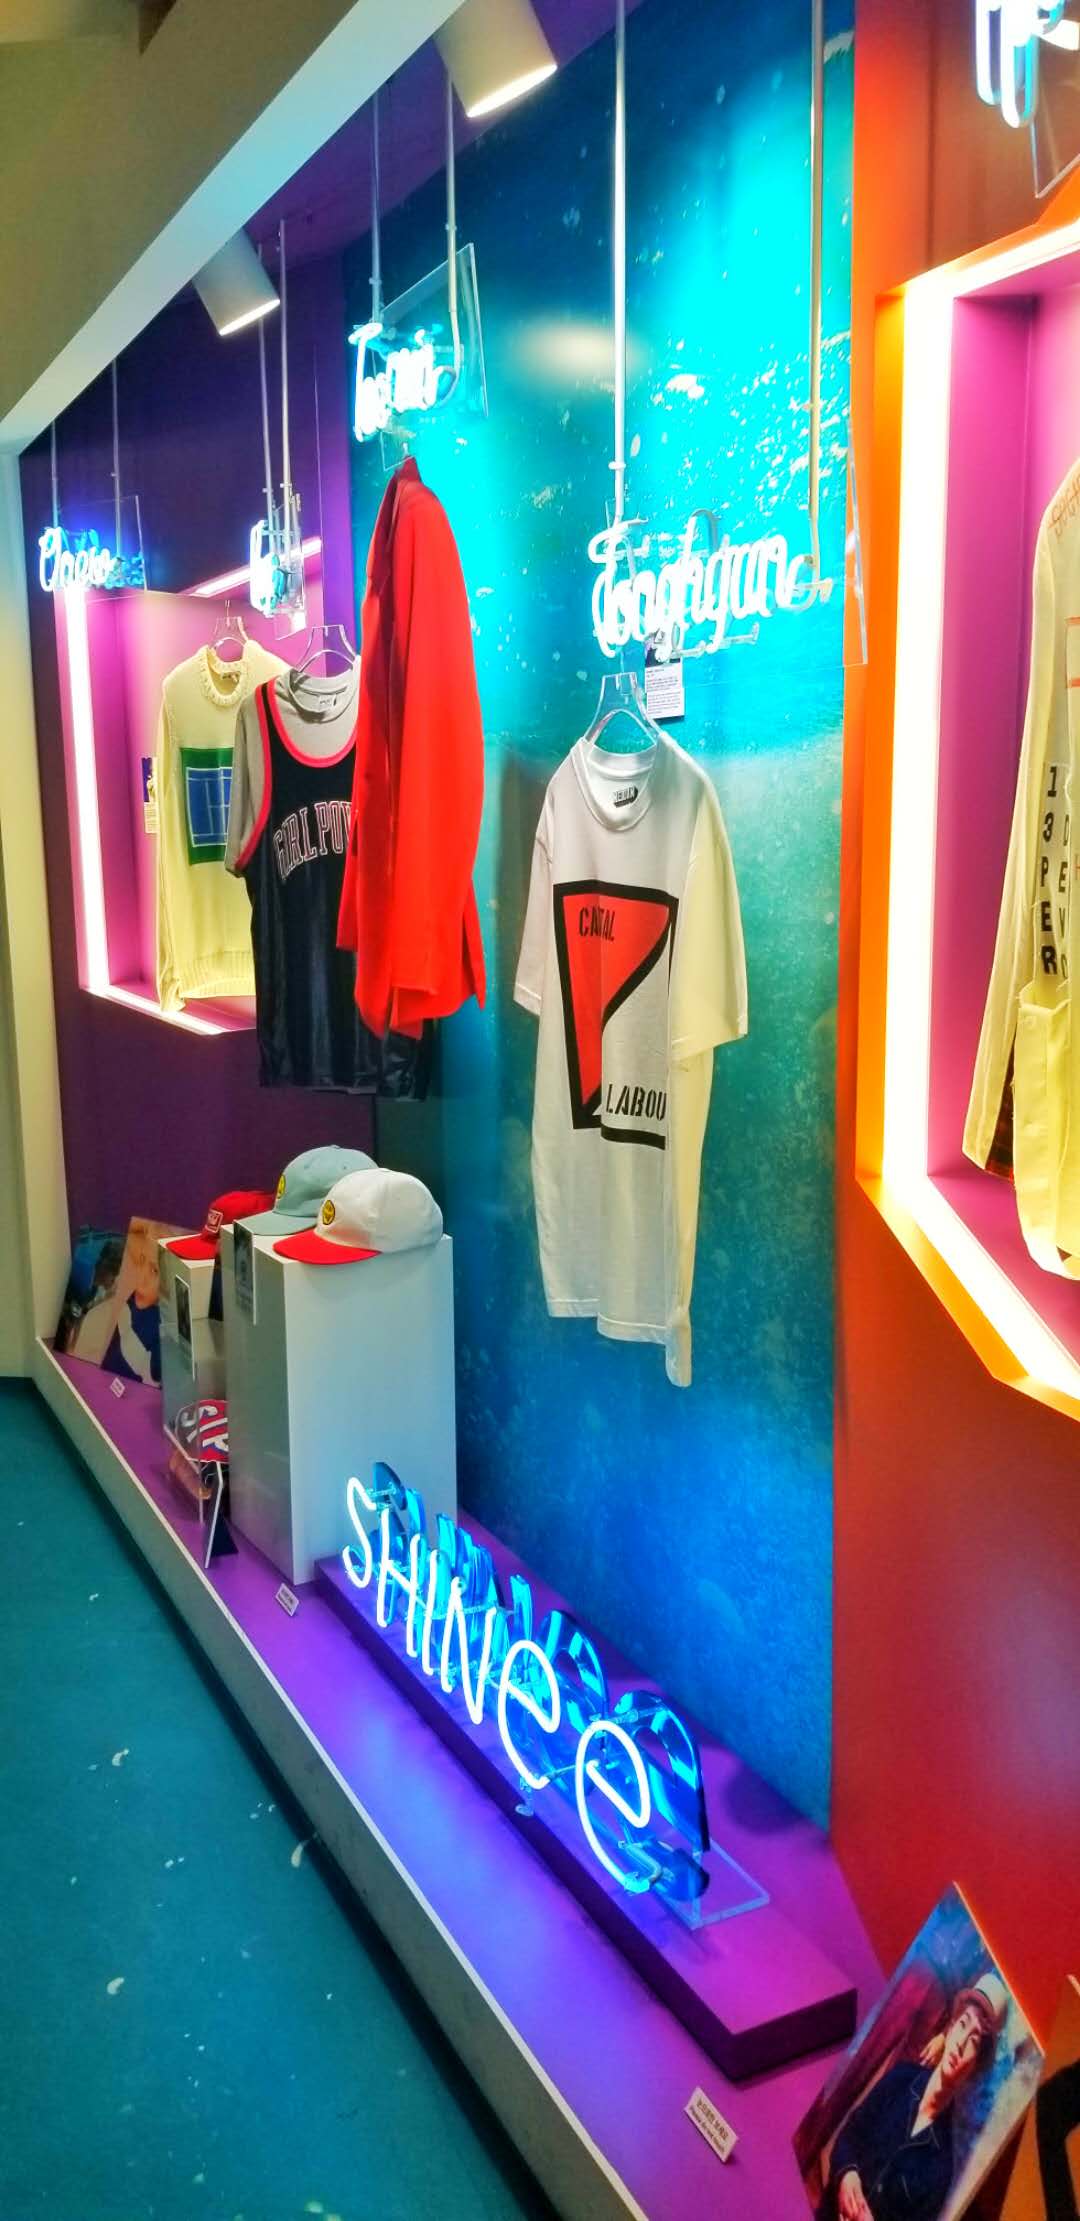 A display of SHINee's outfits in the Replay music video